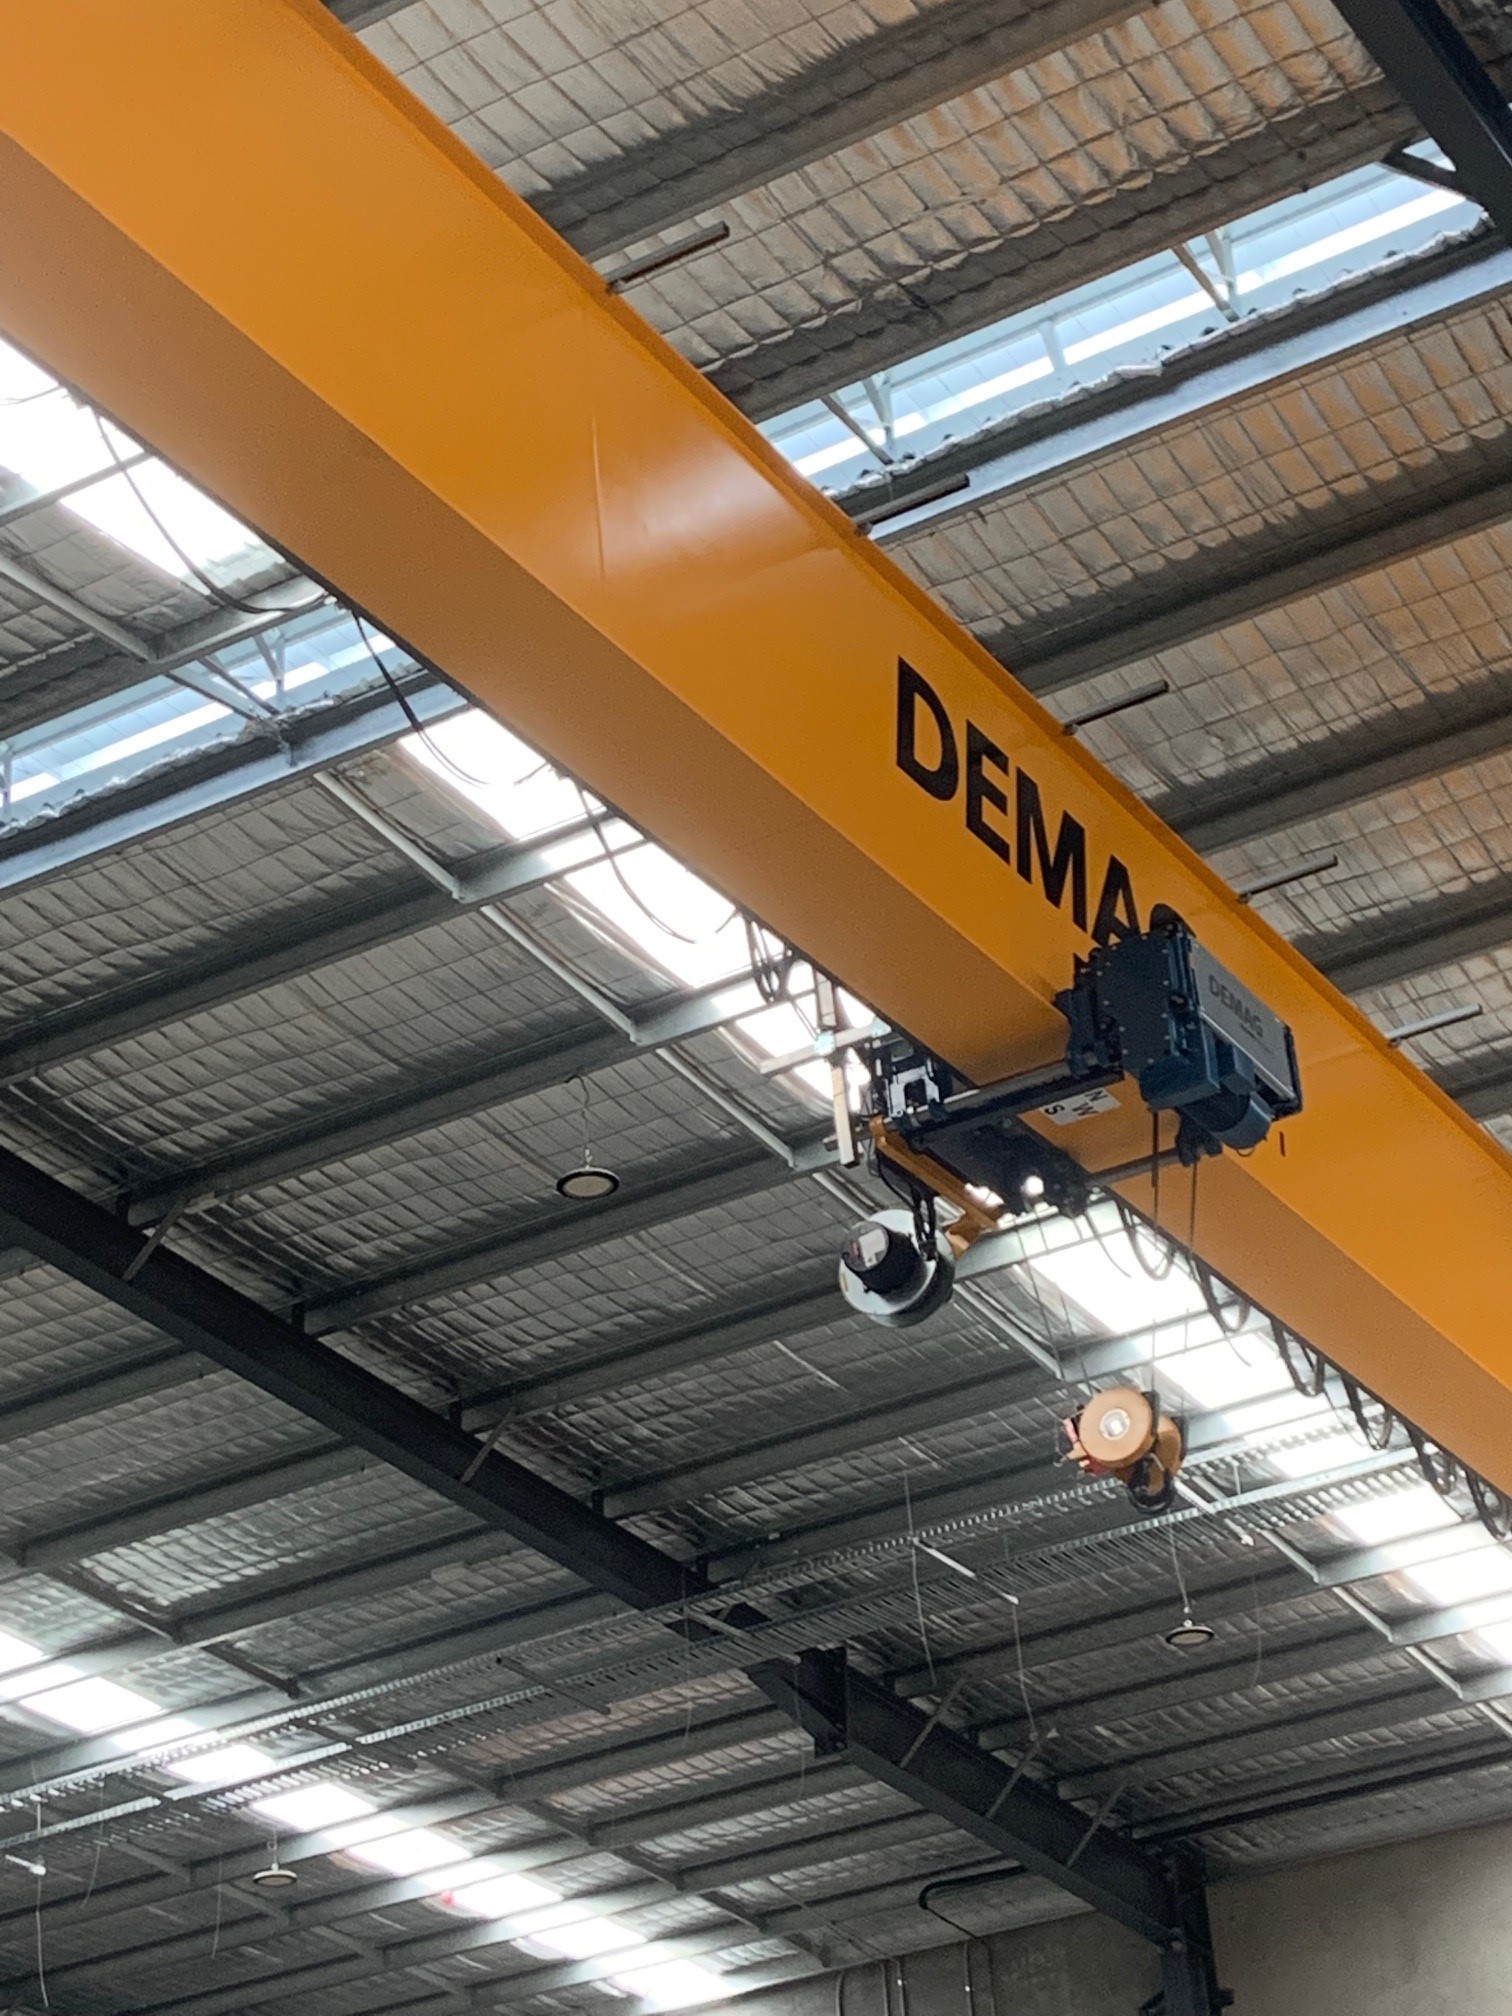 The local Brisbane DEMAG Cranes are just one of our Brisbane construction partners